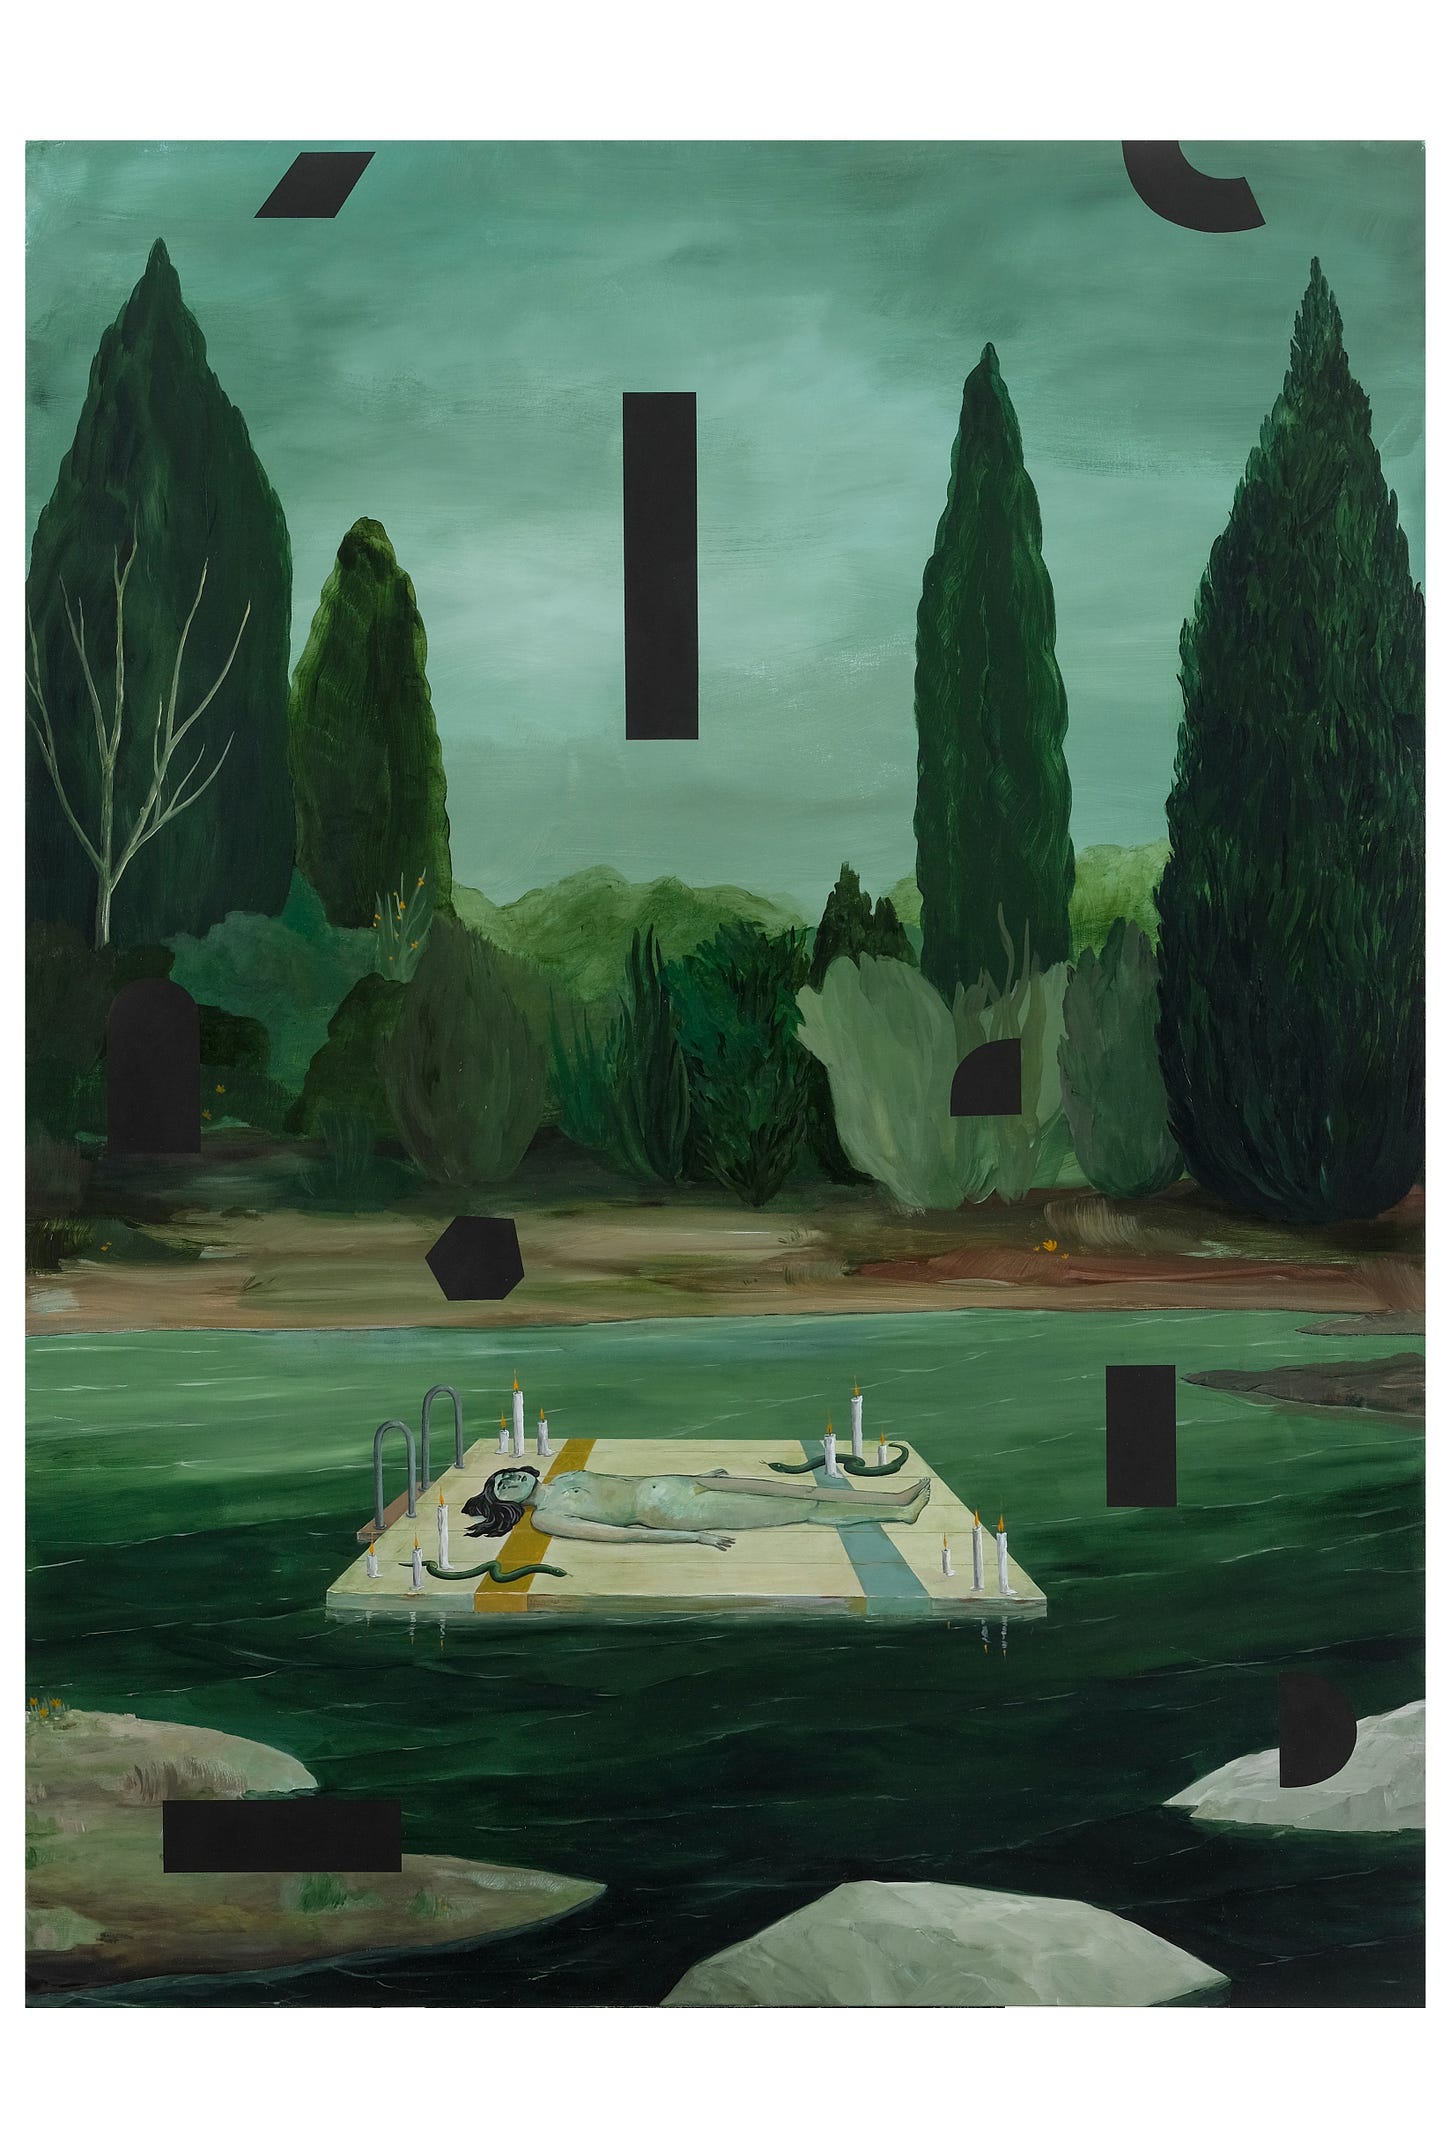 A green painting of a nude figure lying on a floating dock in green water. The figure is surrounded by snakes and lit candles. Large flat black shapes seem to be falling silently from the sky.